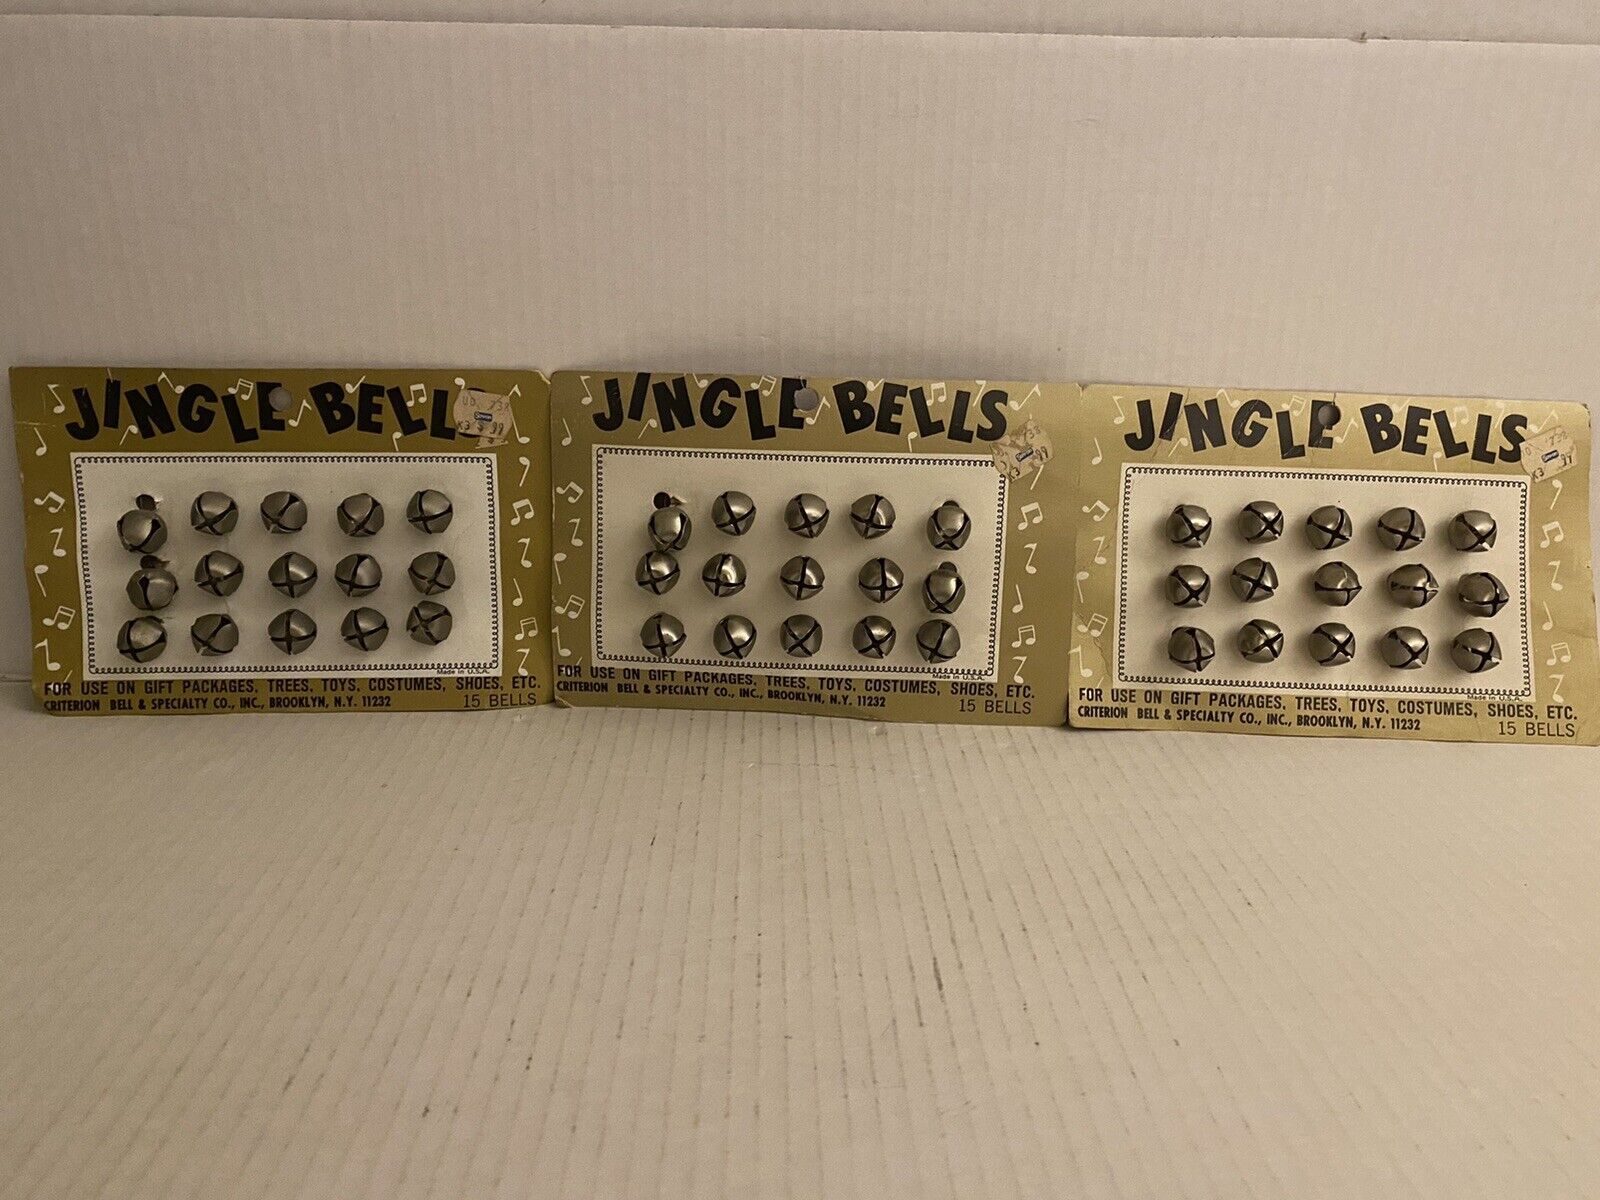 Primary image for JINGLE BELLS for use on gift packages, trees, toys, costumes, 15 bells each = 45